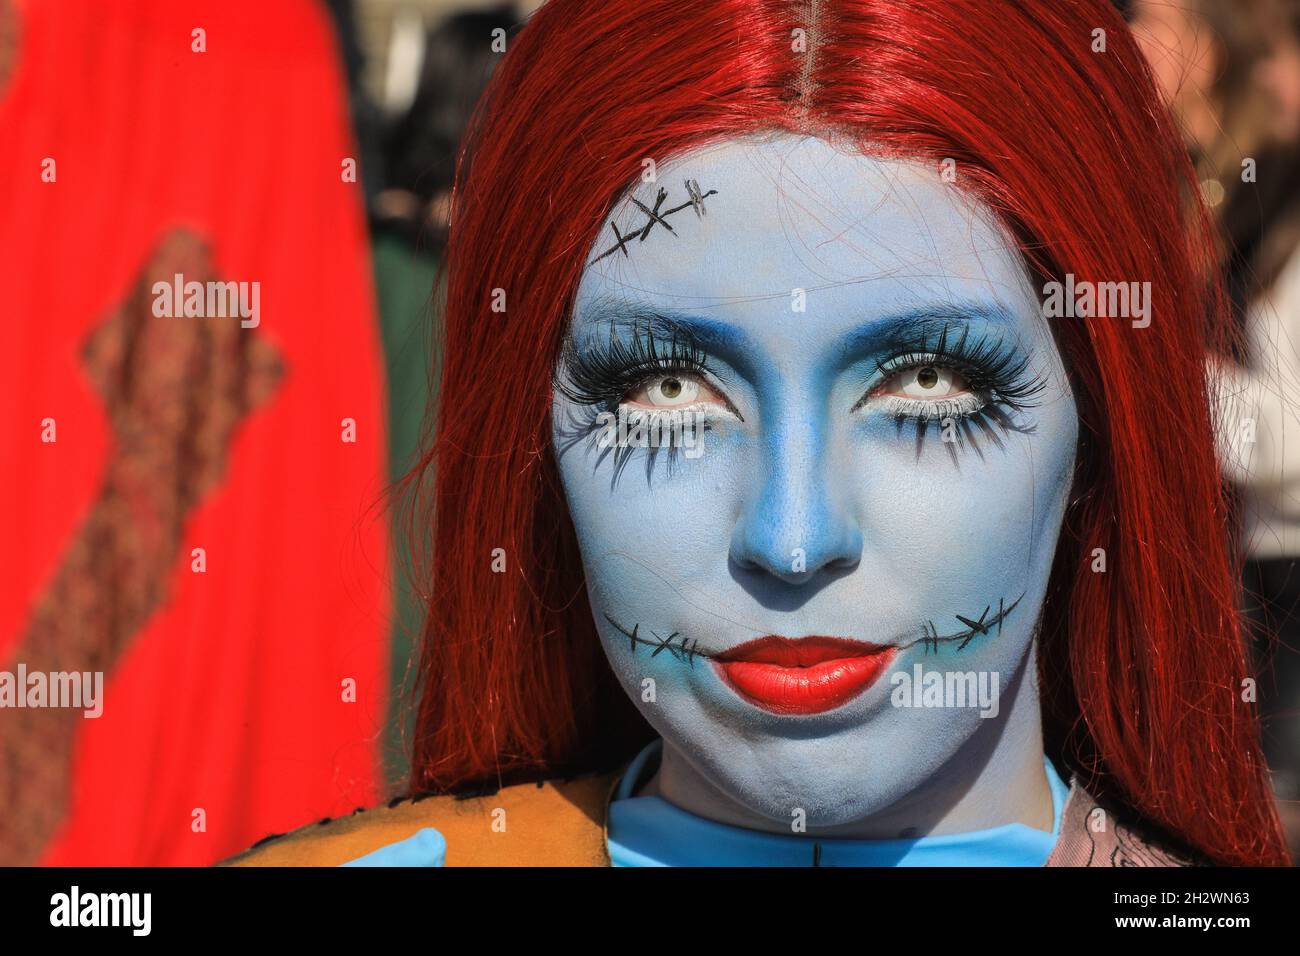 ExCel, London, UK. 24th Oct, 2021. A fan poses as Sally from Nightmare before Christmas. Cosplayers and fans of anime, sci-fi, games, and all things pop culture once again descend on the ExCel exhibition centre in London for MCM Comic Con London on its last day. Credit: Imageplotter/Alamy Live News Stock Photo